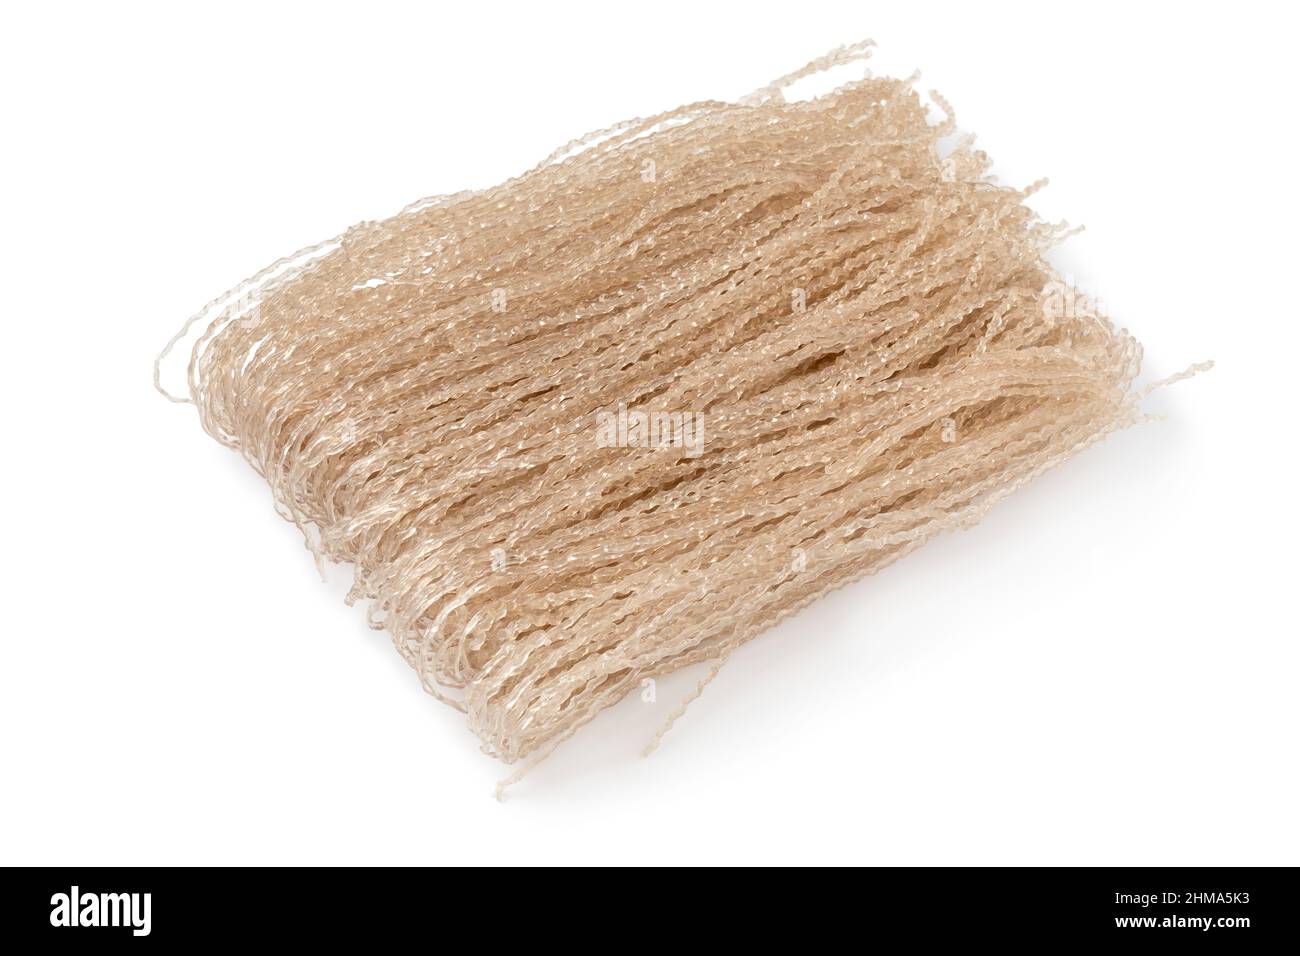 Bunch of raw sweet potato starch glass noodle, Dangmyeon,  isolated on white background Stock Photo